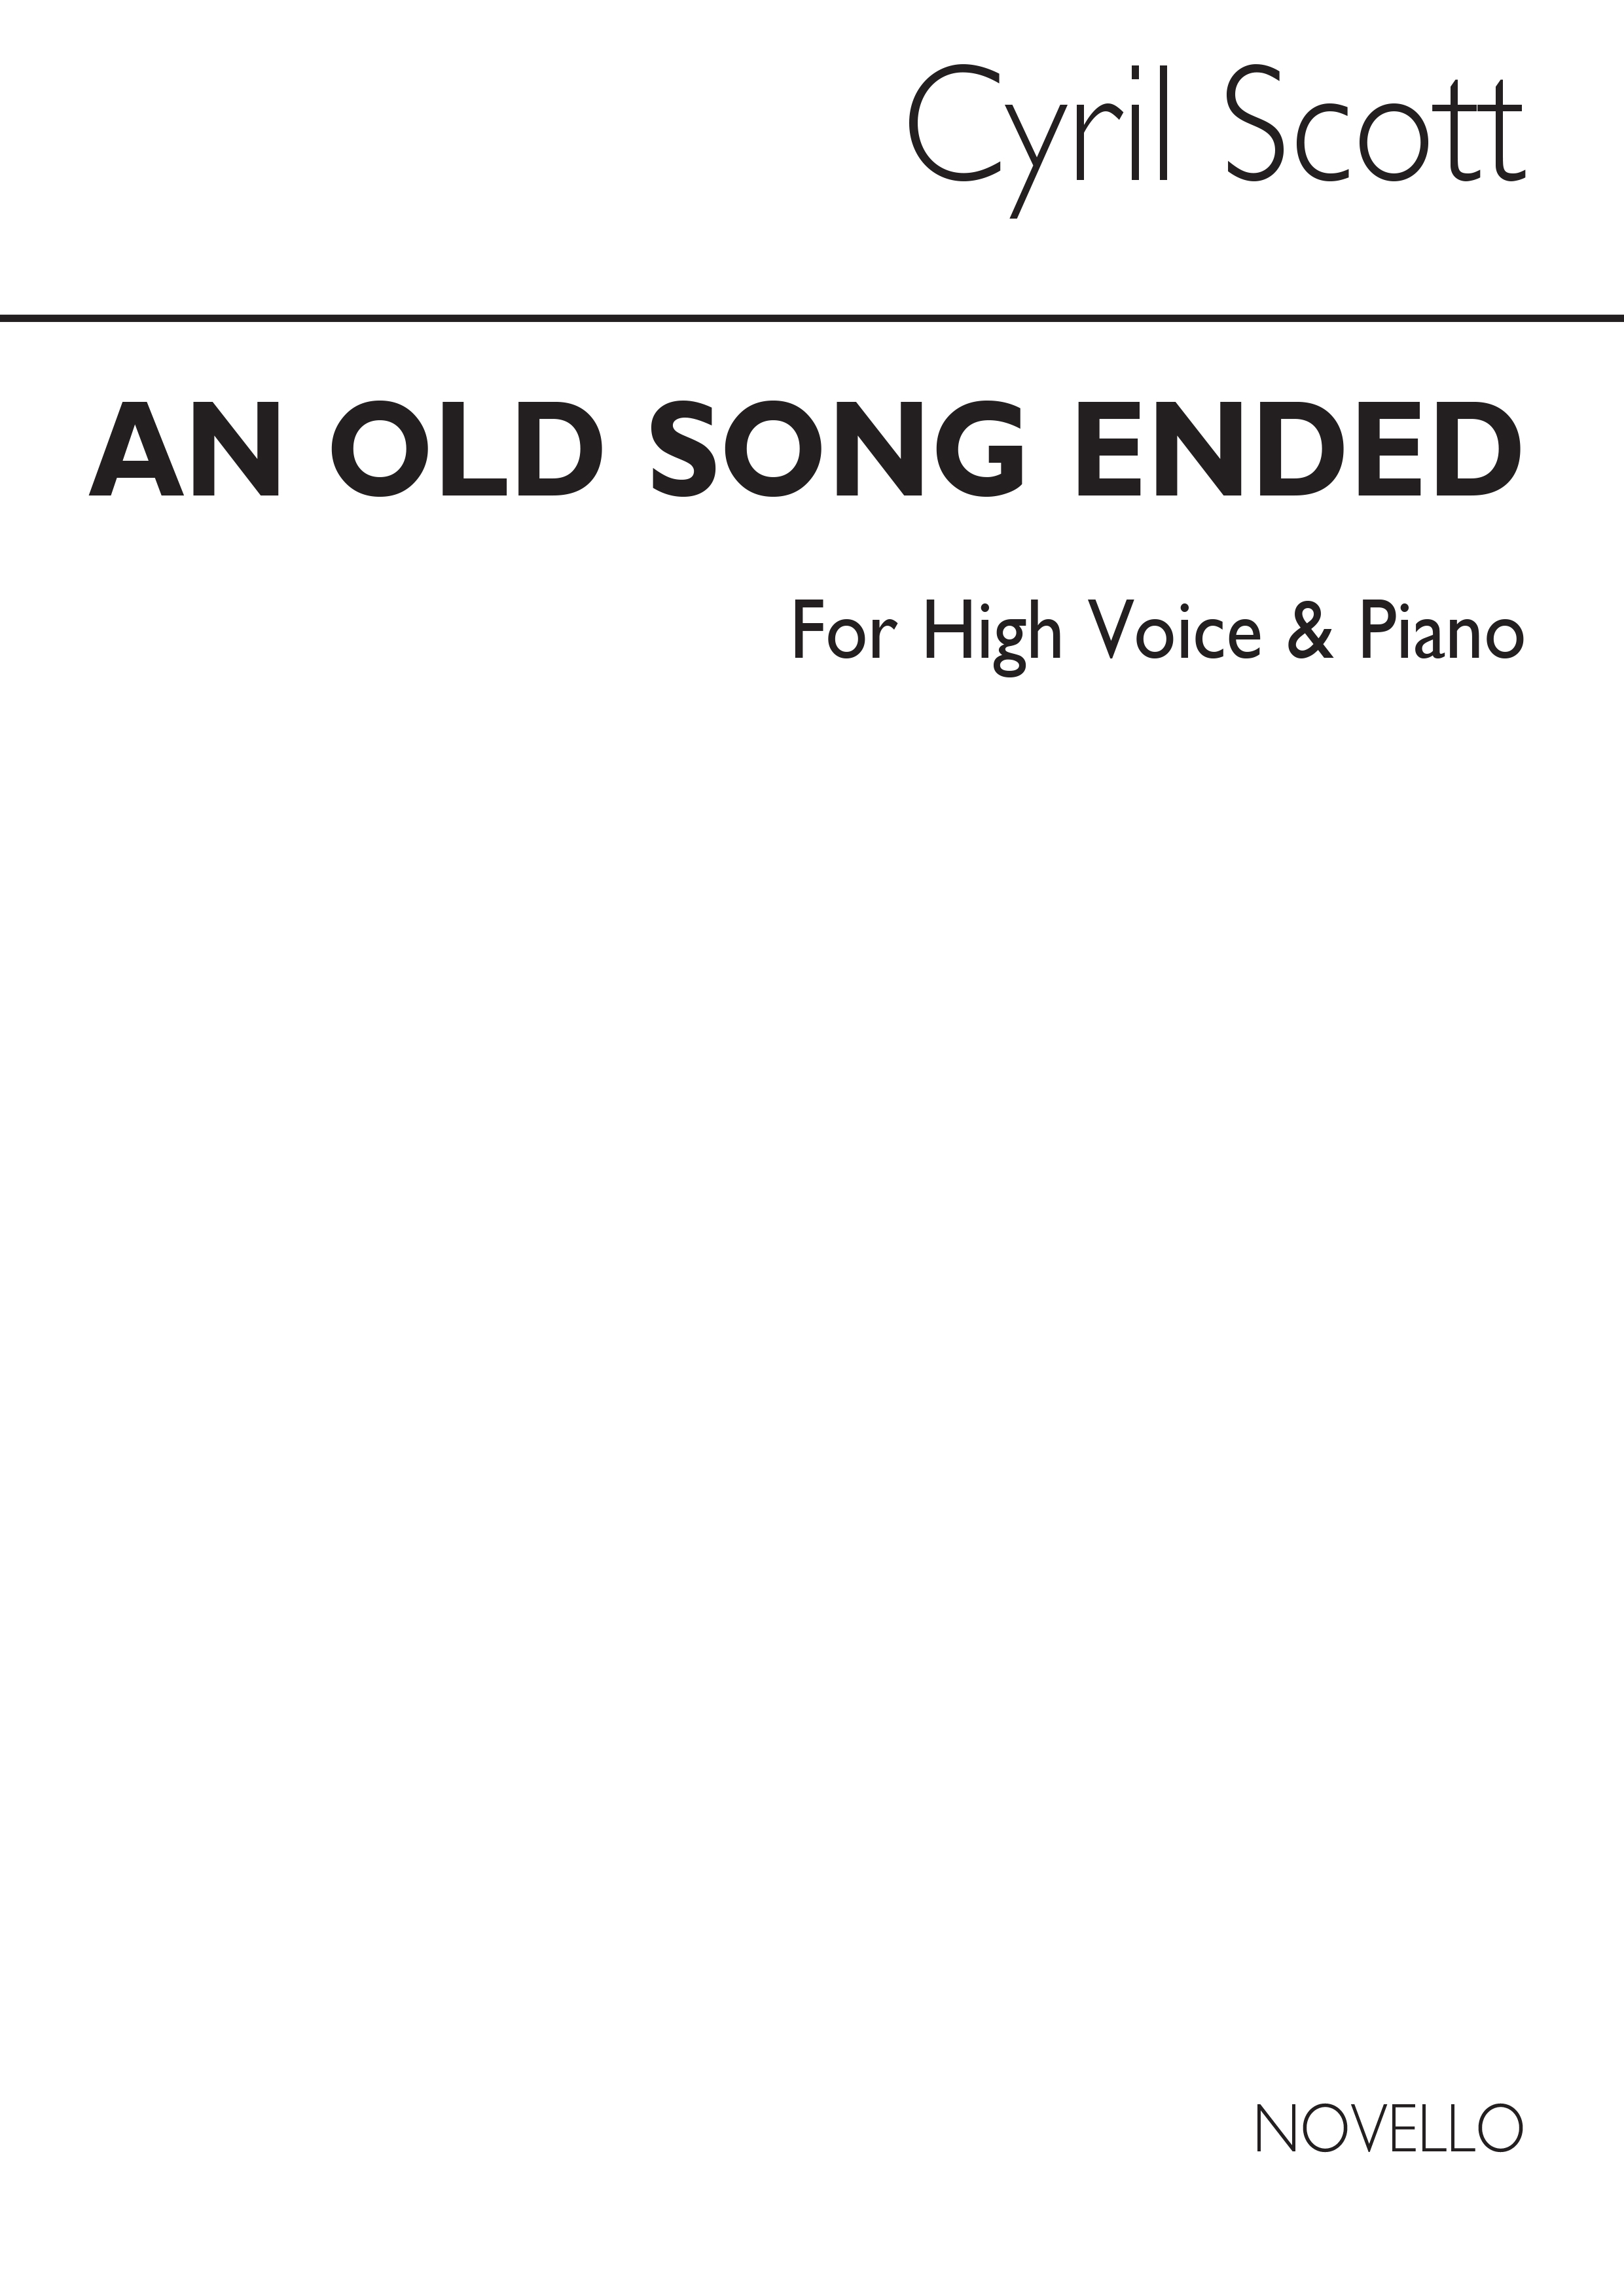 Cyril Scott: An Old Song Ended-high Voice/Piano (Key-f): High Voice: Vocal Work